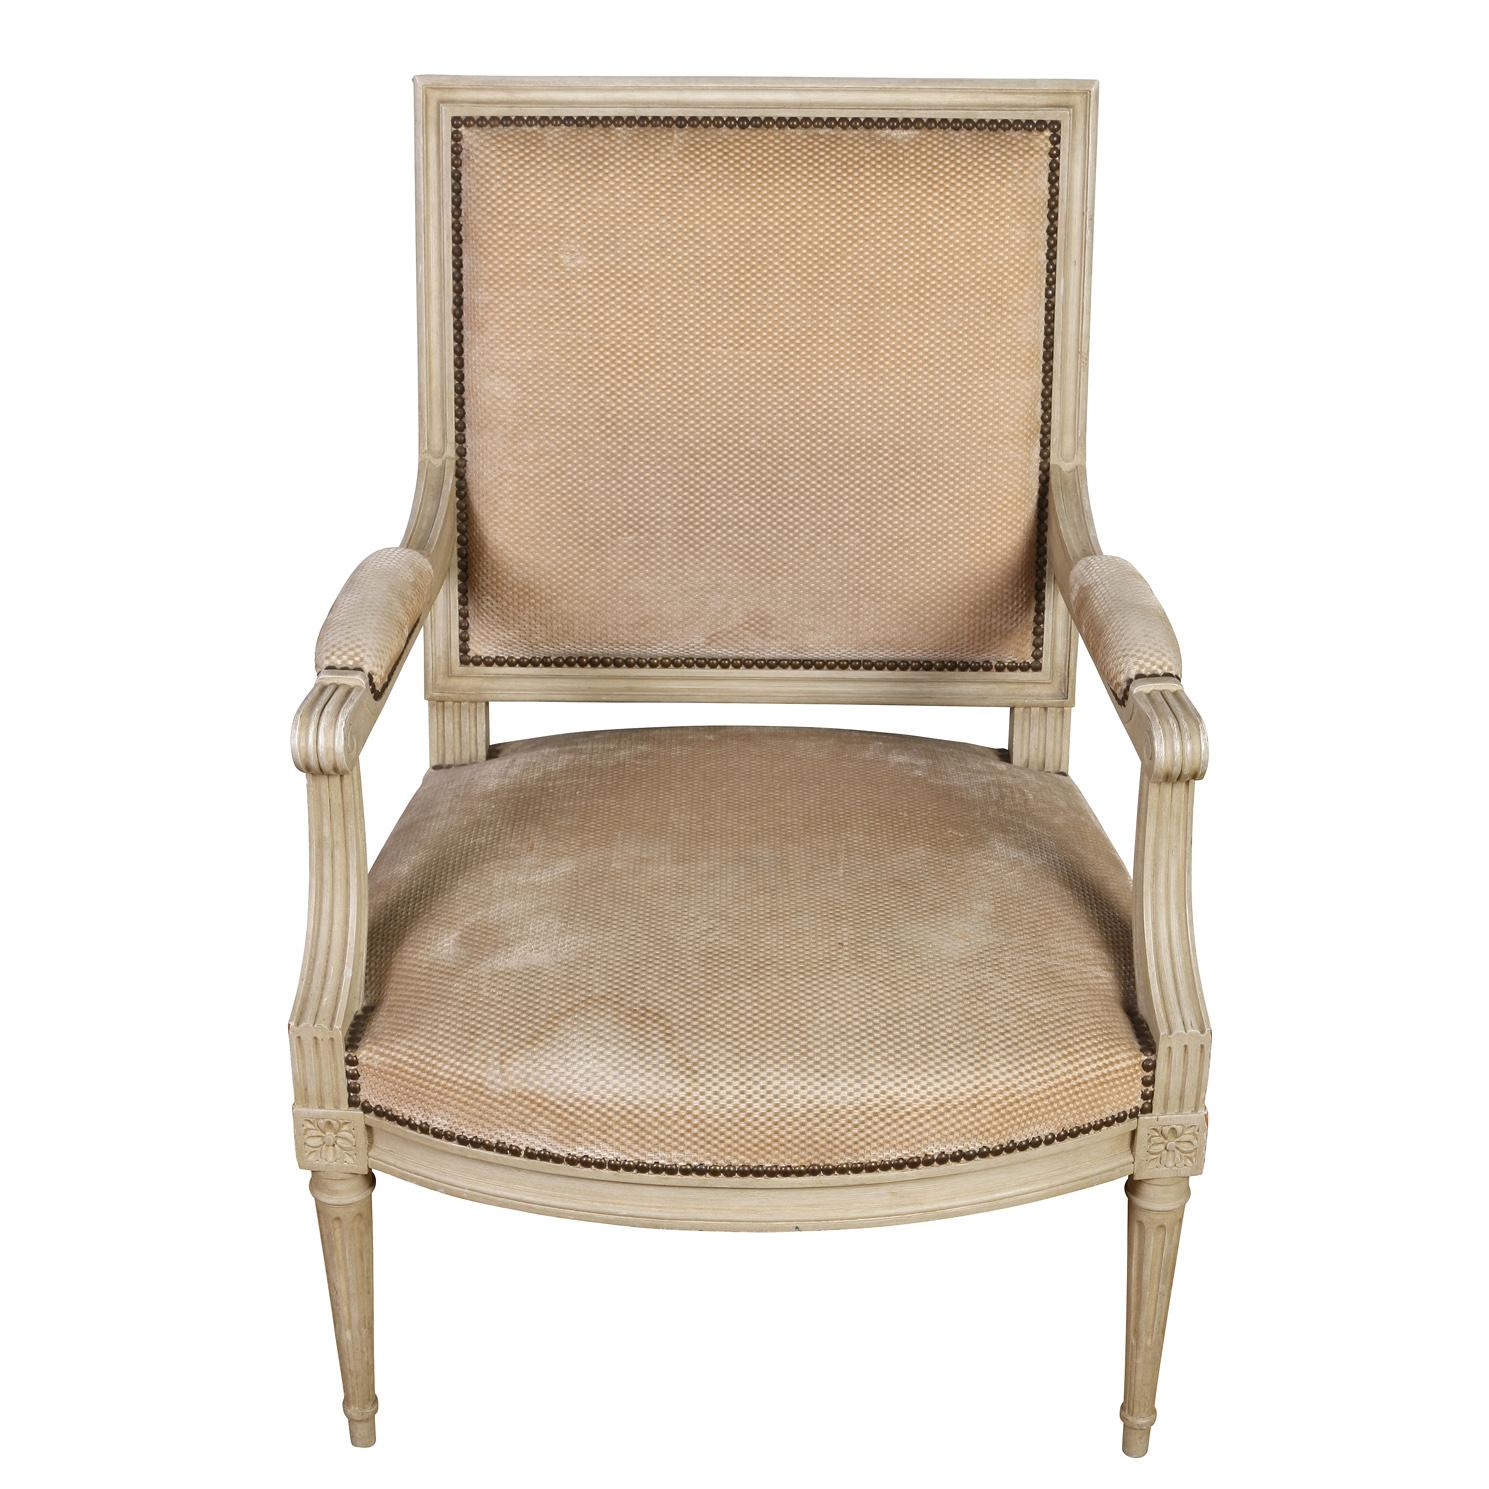 A pair of oversized, painted French arm chairs circa 1940. The pair of Louis XVI chairs are painted off white, with square backs, reeded and carved frame, arms and tapered legs. Each leg meets the seat frame with a carved floral motif. Arm rests are